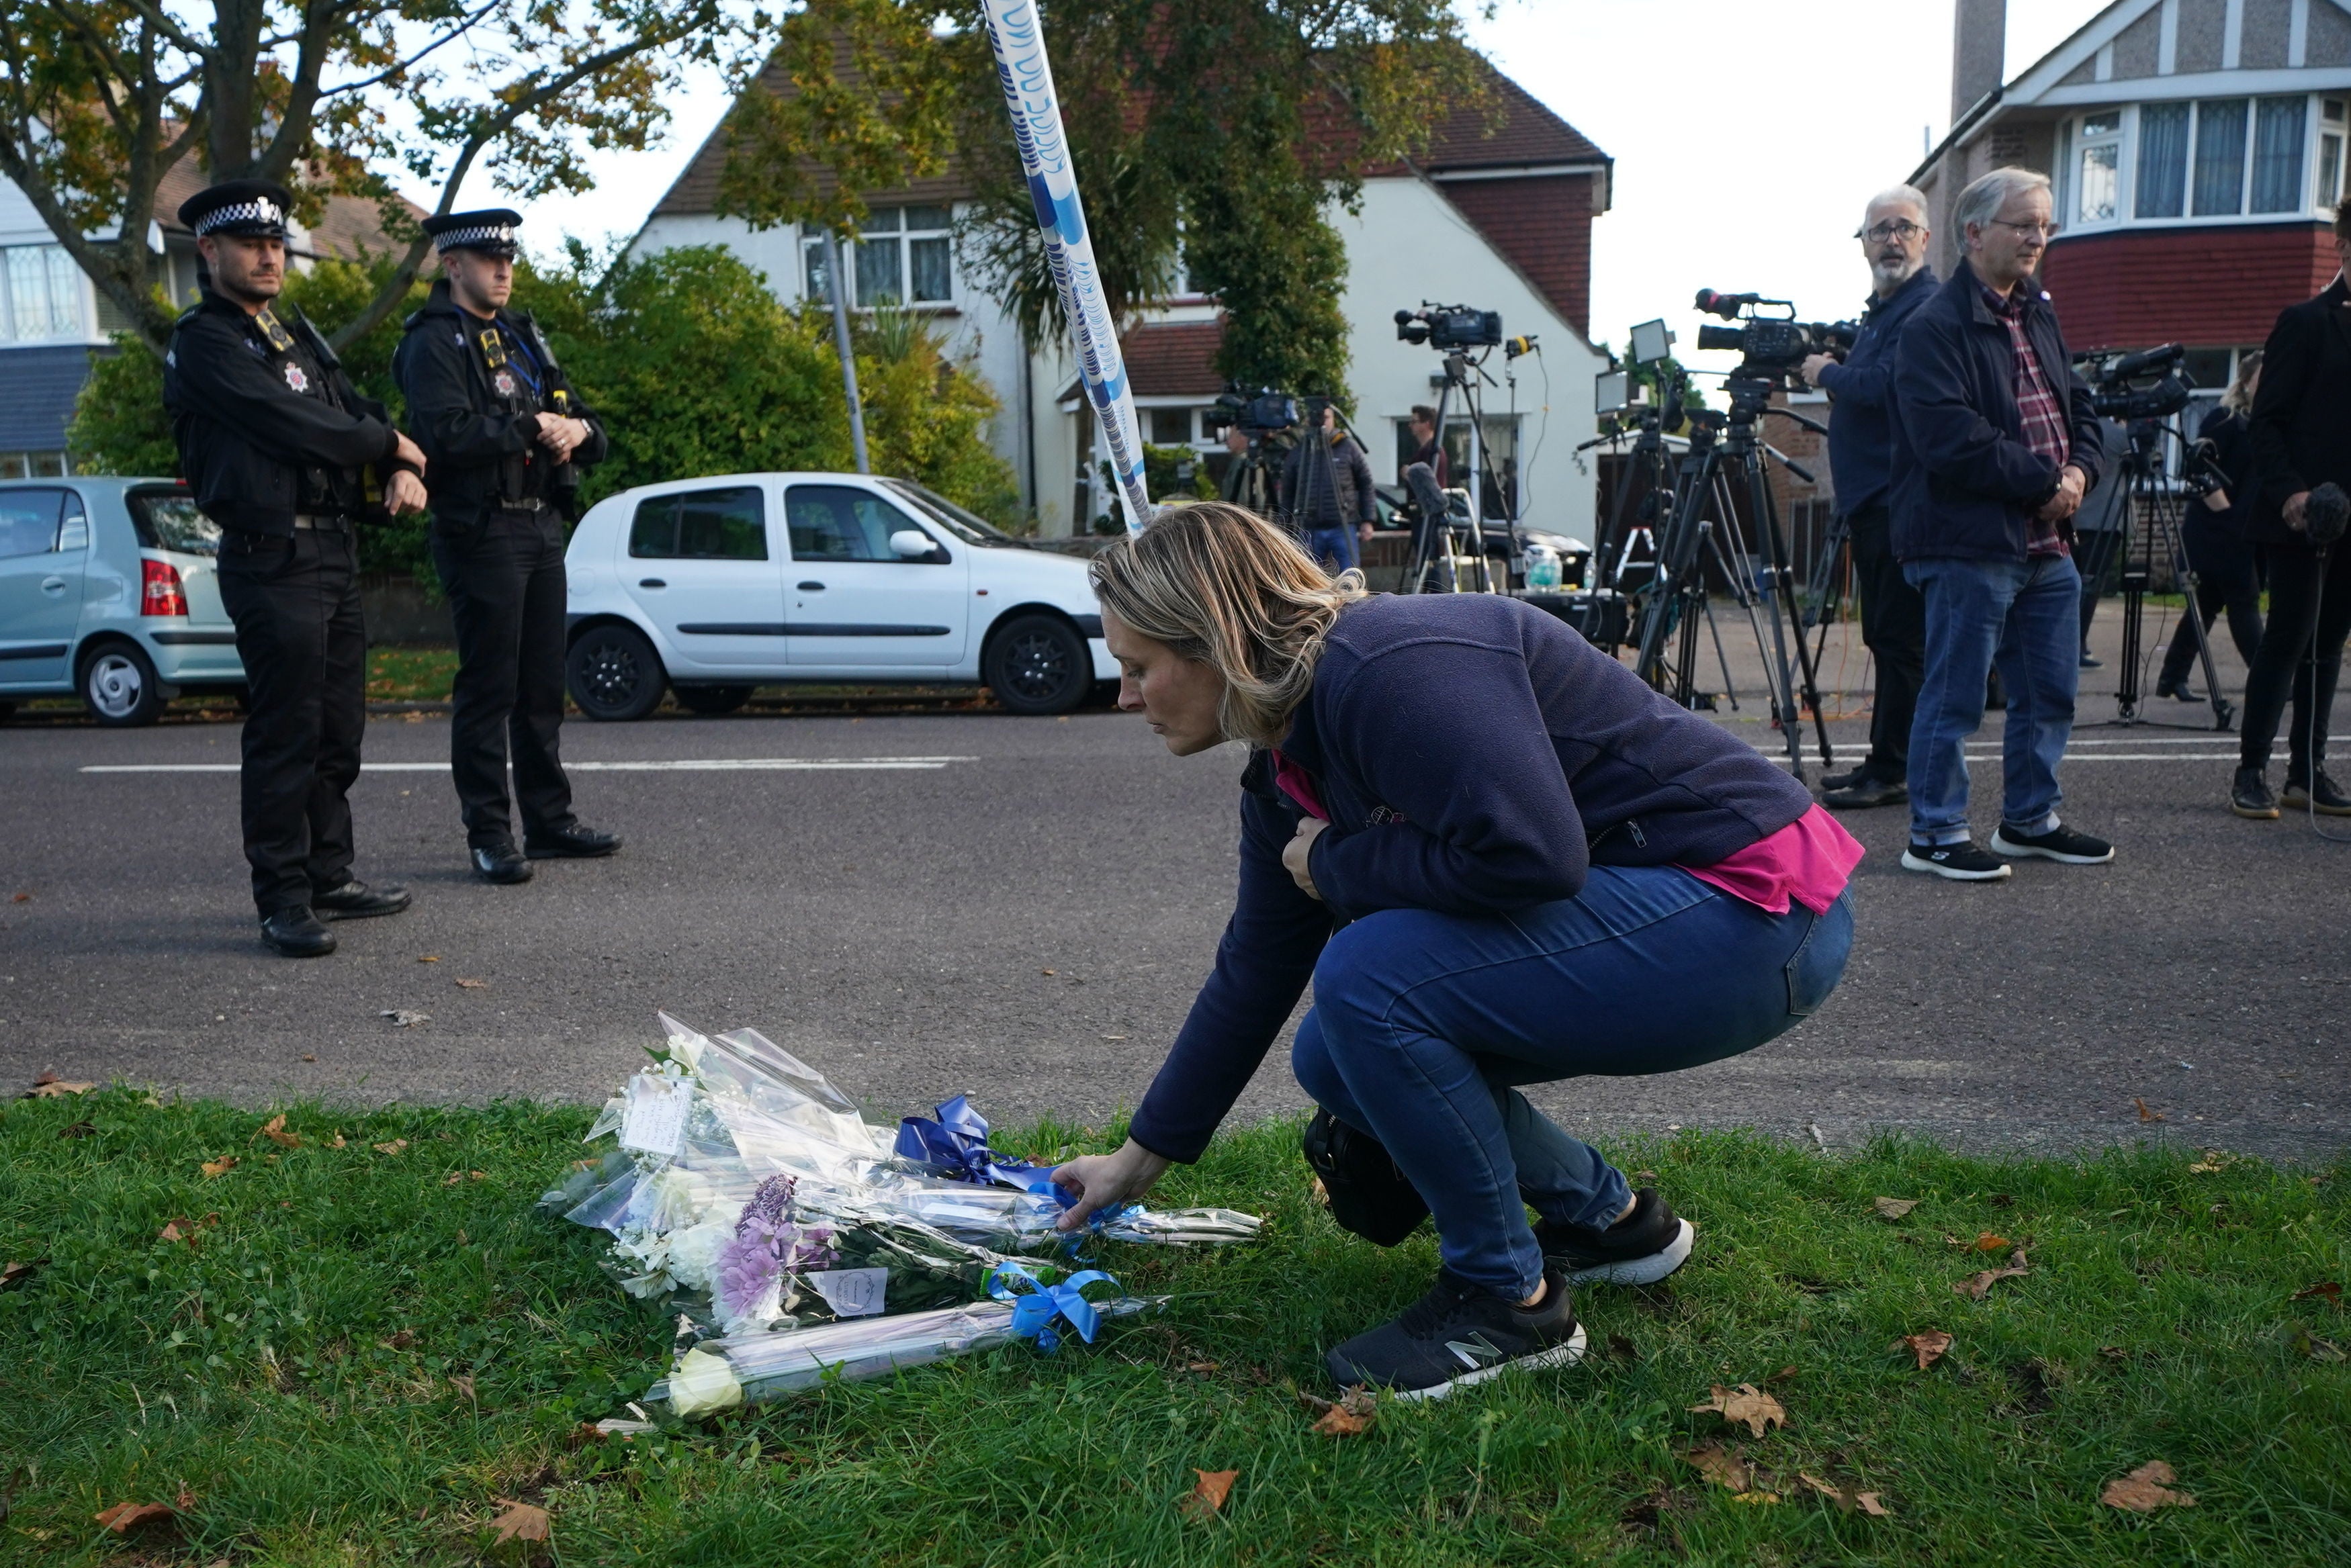 A mourner lays flowers at the scene near the Belfairs Methodist Church